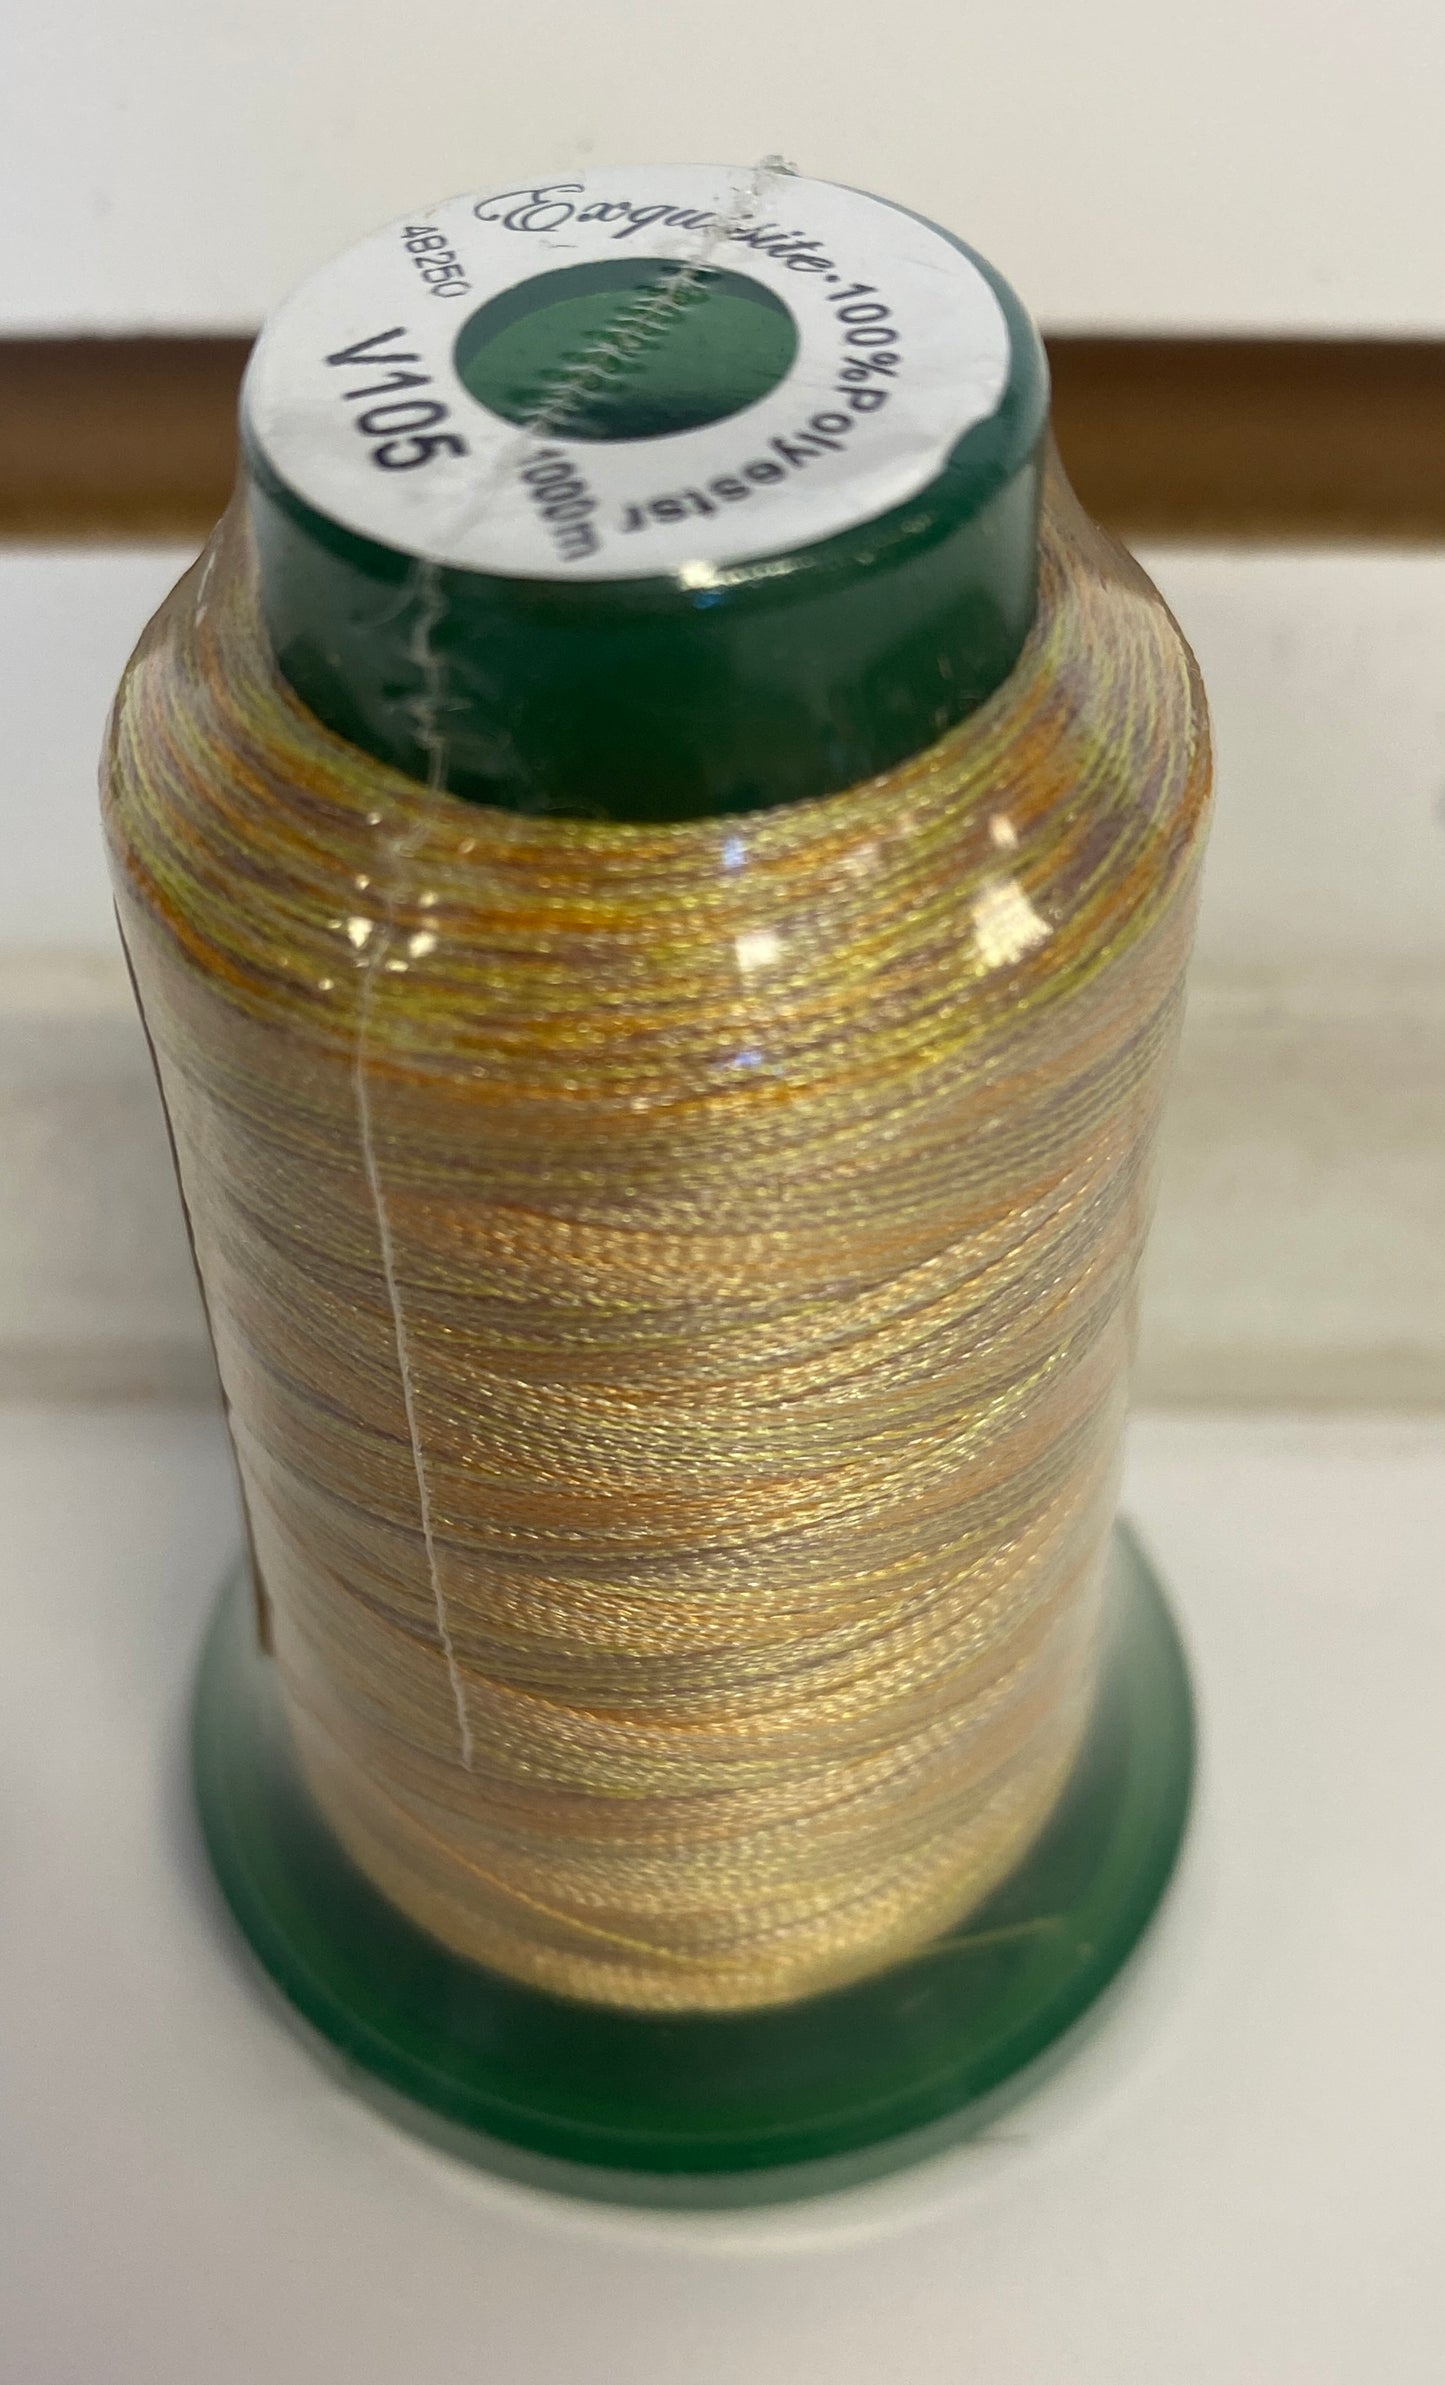 Medley Variegated Embroidery Thread, 40 weight